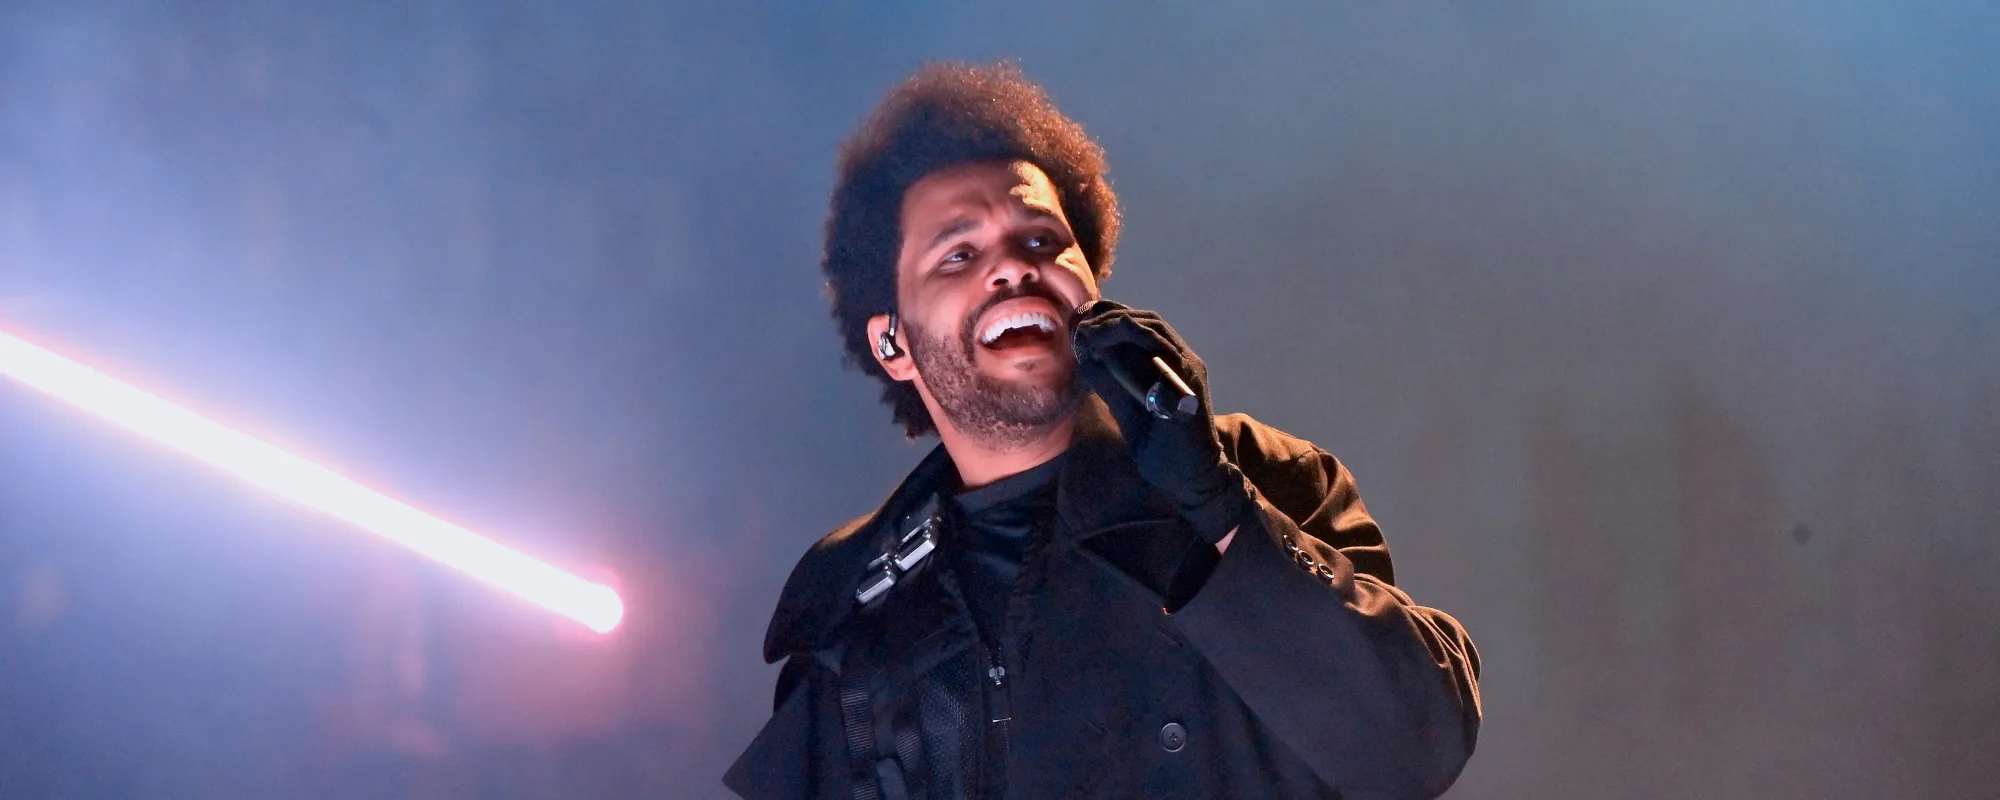 5 Songs You Didn’t Know The Weeknd Wrote for Other Artists